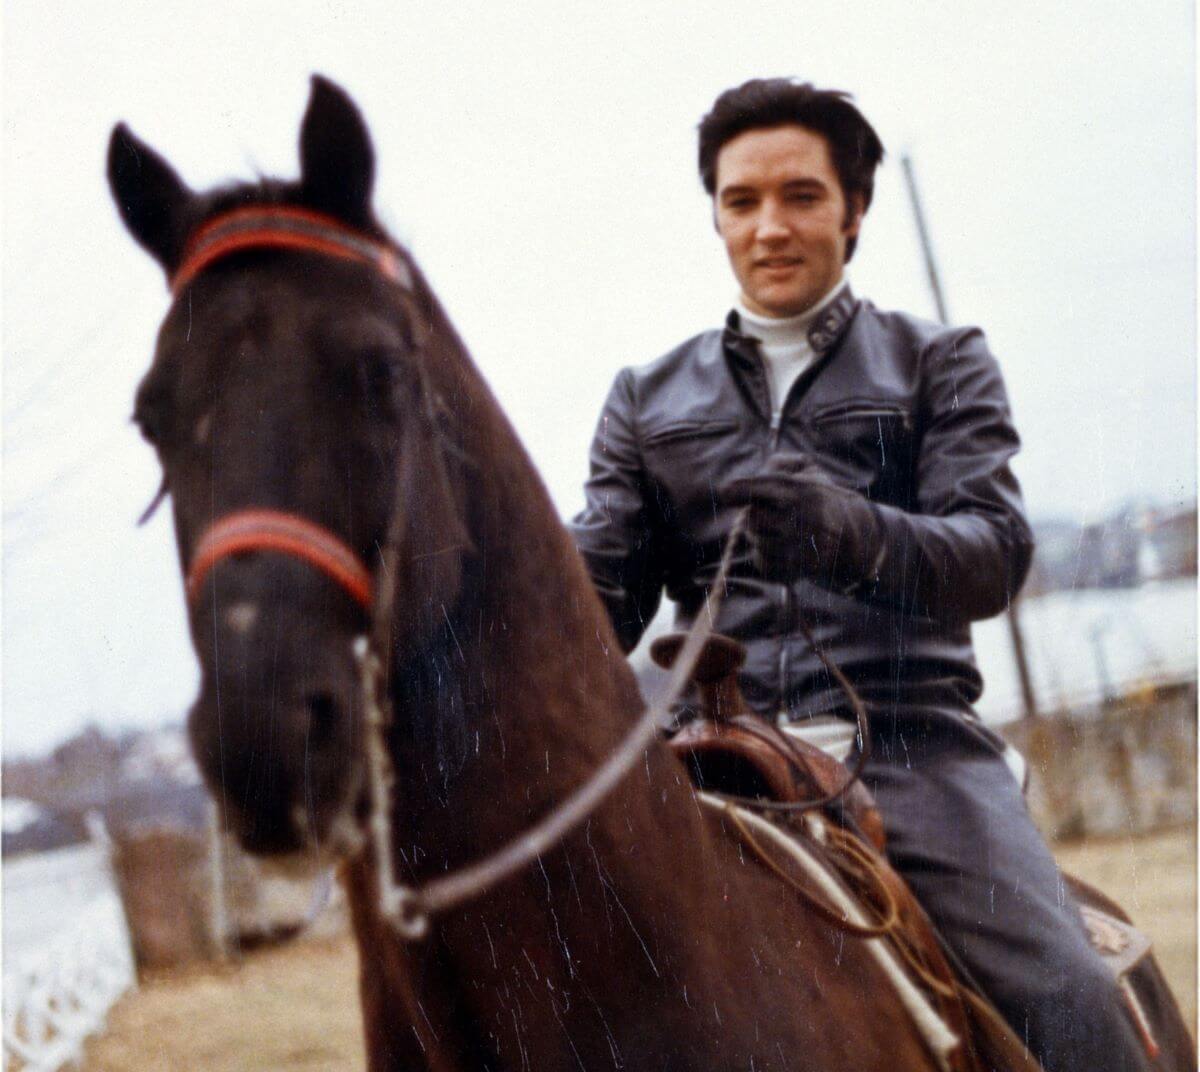 Elvis Presley rides a horse outside. He wears a leather jacket and gloves.